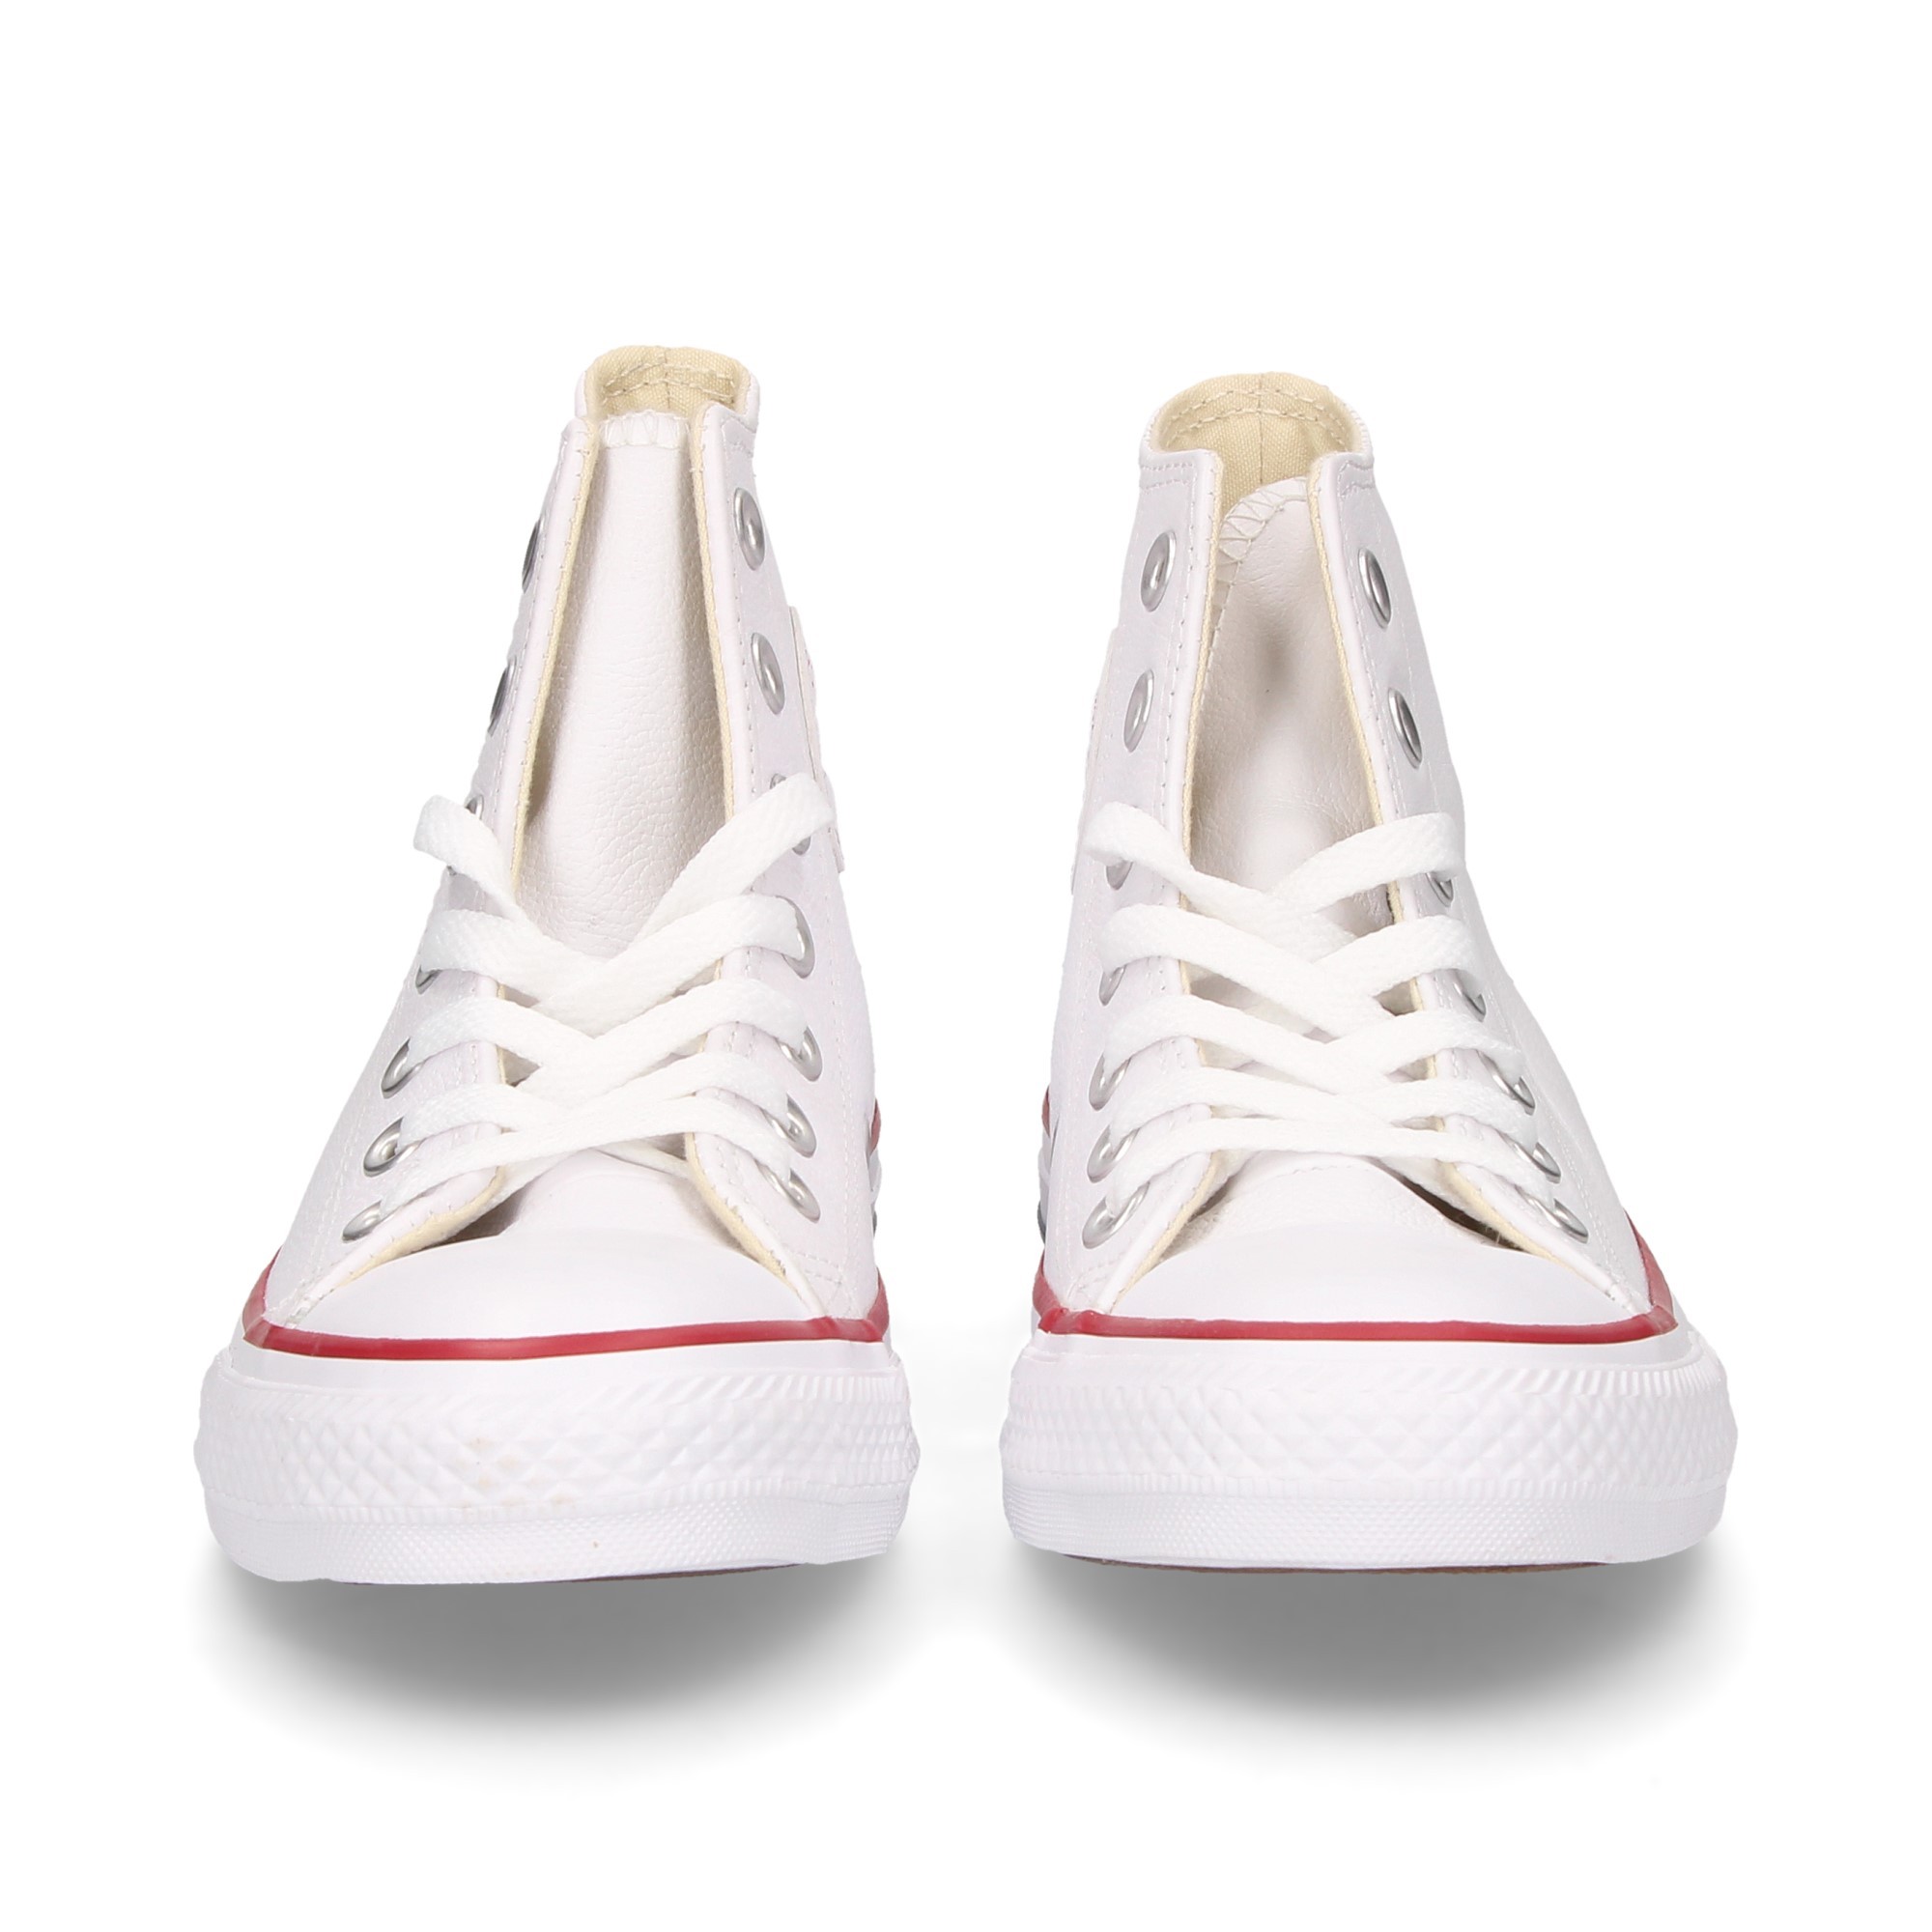 bootin-all-star-white-leather